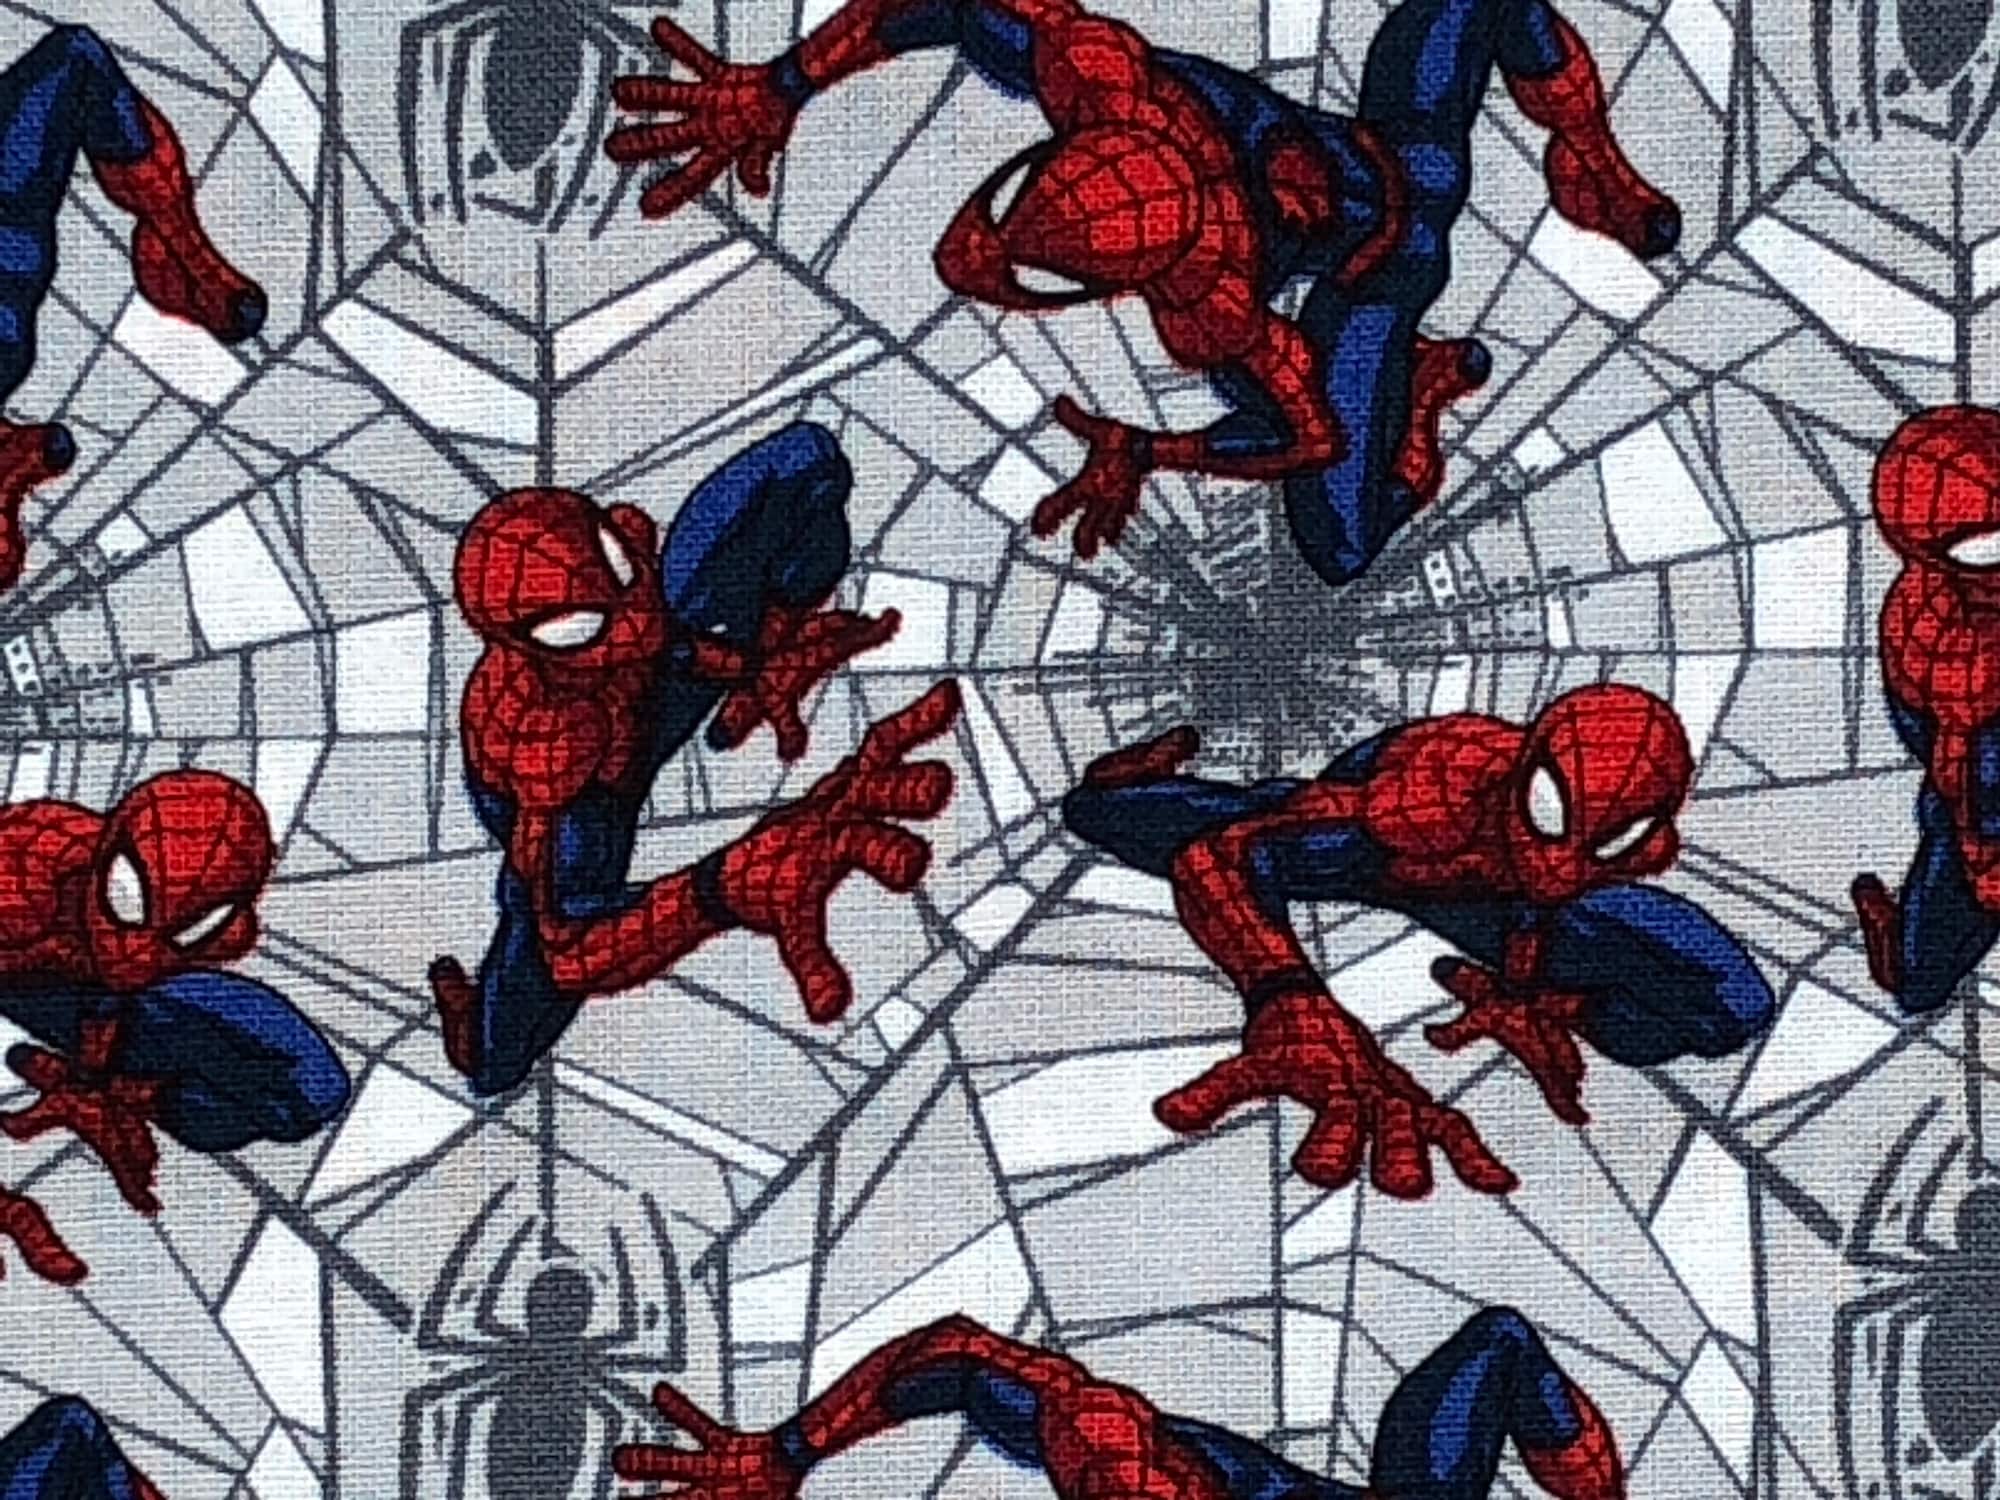 This fabric is a called Spider Man Web Crawler. The webs are grey and white and spider man is crawling all over them